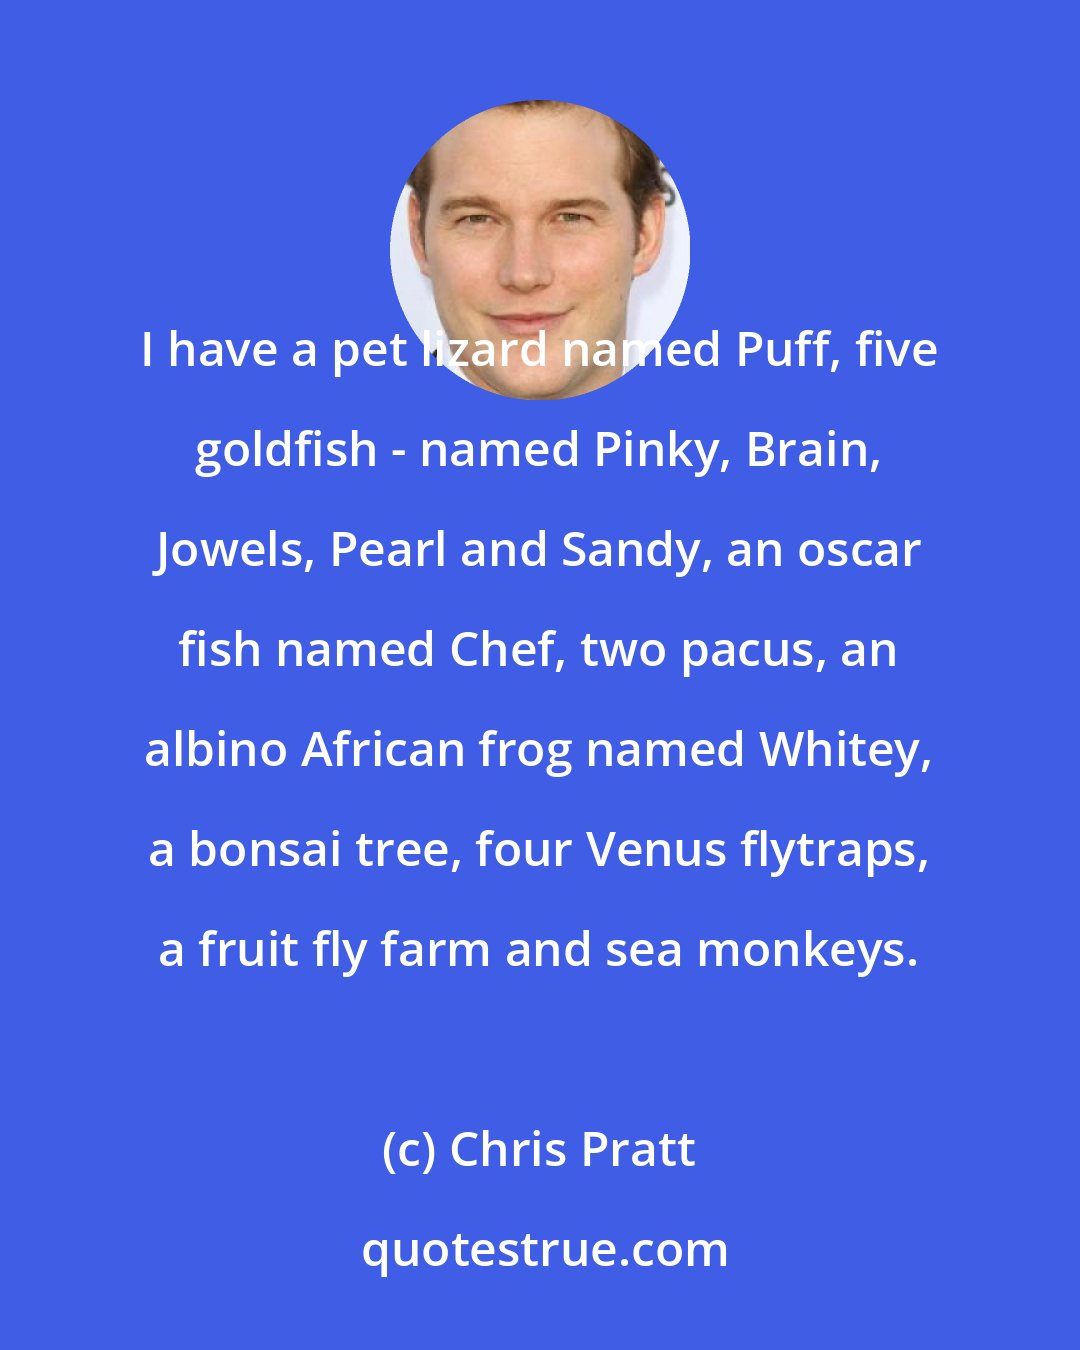 Chris Pratt: I have a pet lizard named Puff, five goldfish - named Pinky, Brain, Jowels, Pearl and Sandy, an oscar fish named Chef, two pacus, an albino African frog named Whitey, a bonsai tree, four Venus flytraps, a fruit fly farm and sea monkeys.